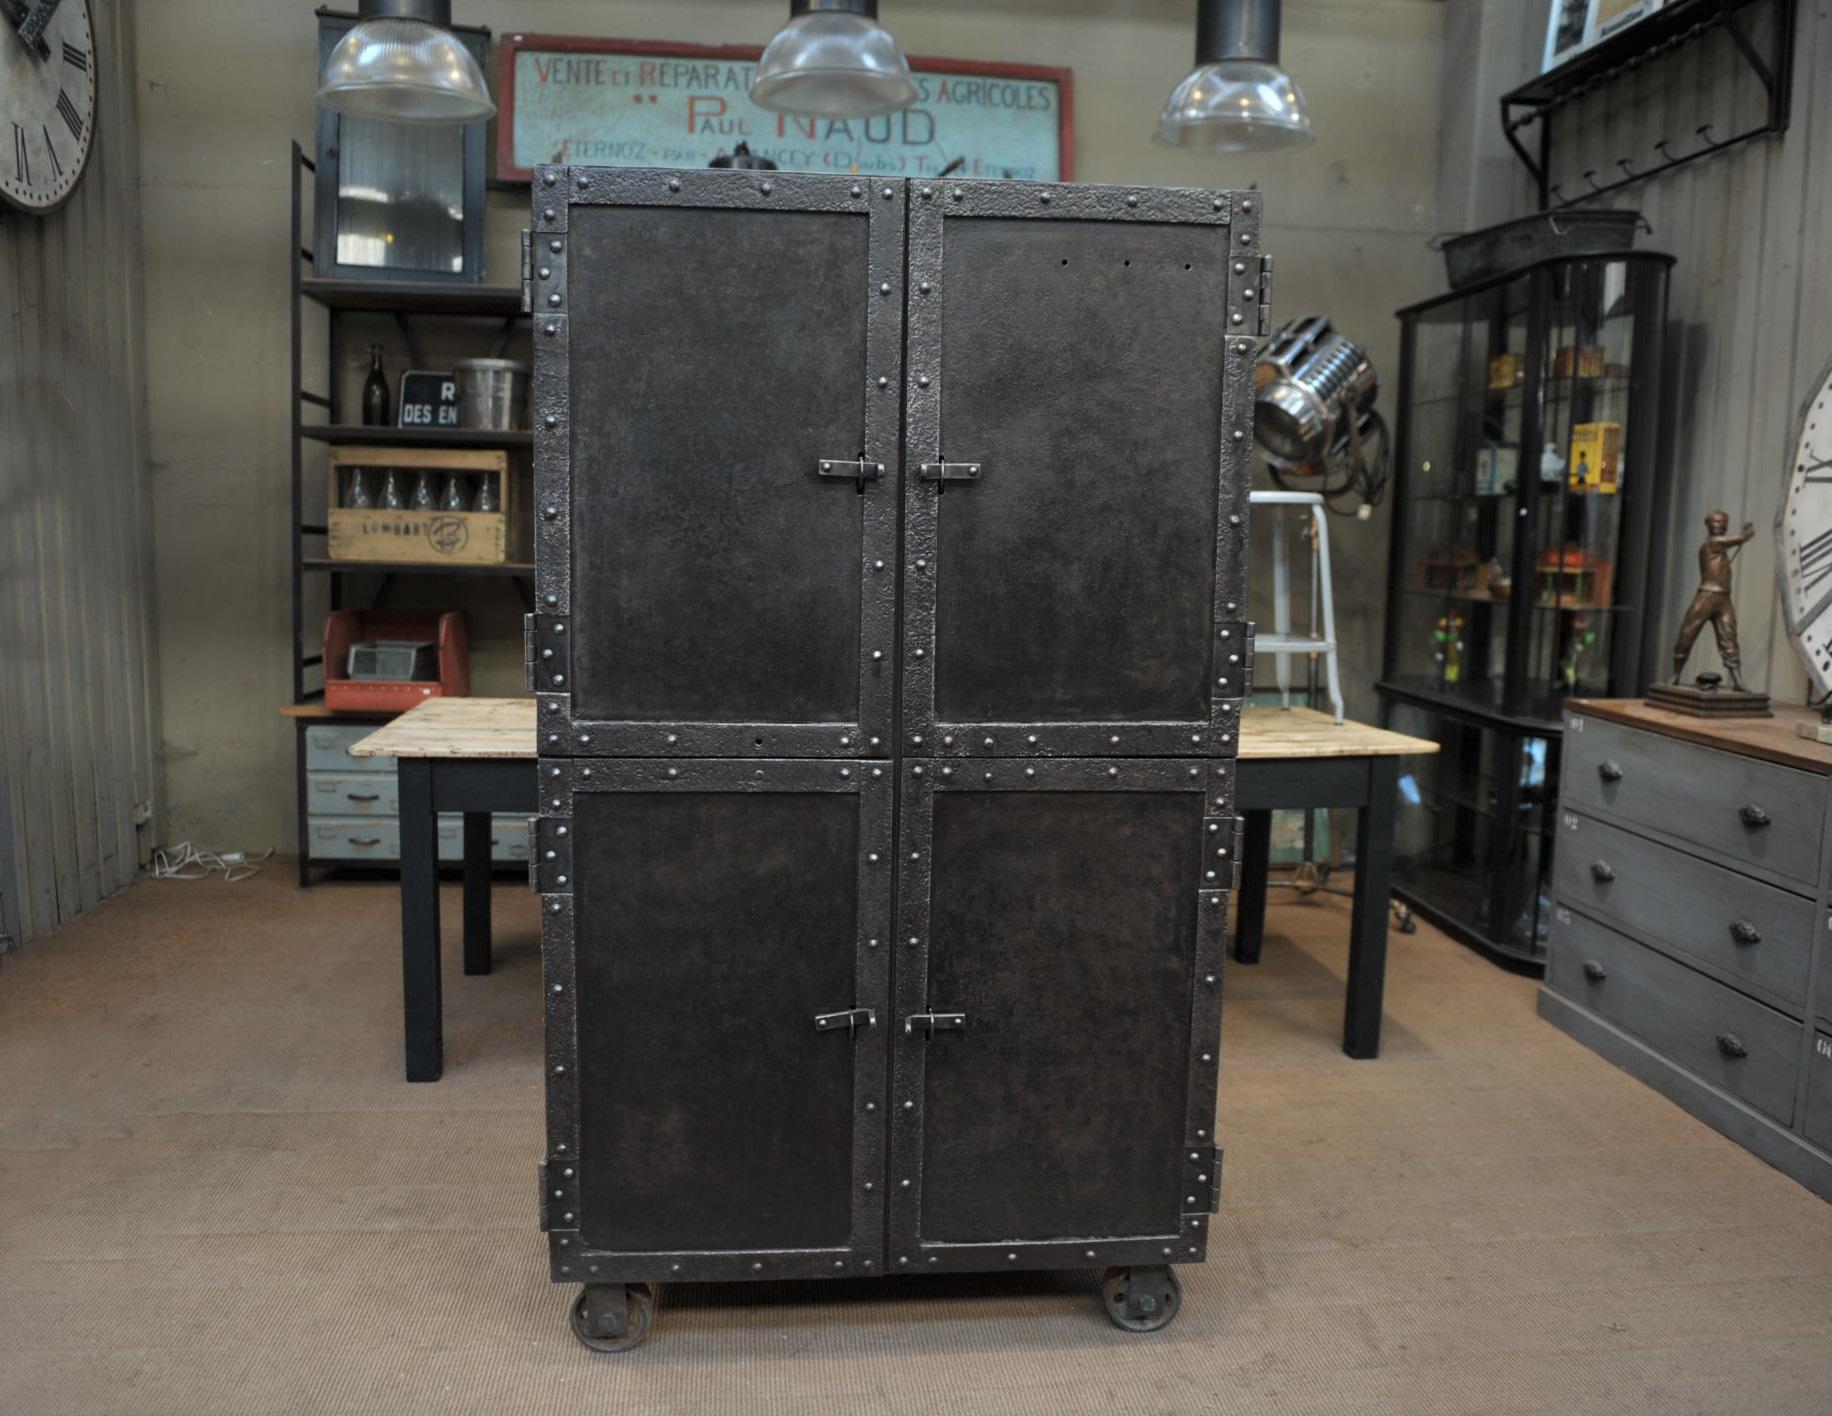 Exceptional Four-Doors Industrial Riveted Iron Cabinet on Wheels, circa 1900 (Frühes 20. Jahrhundert)